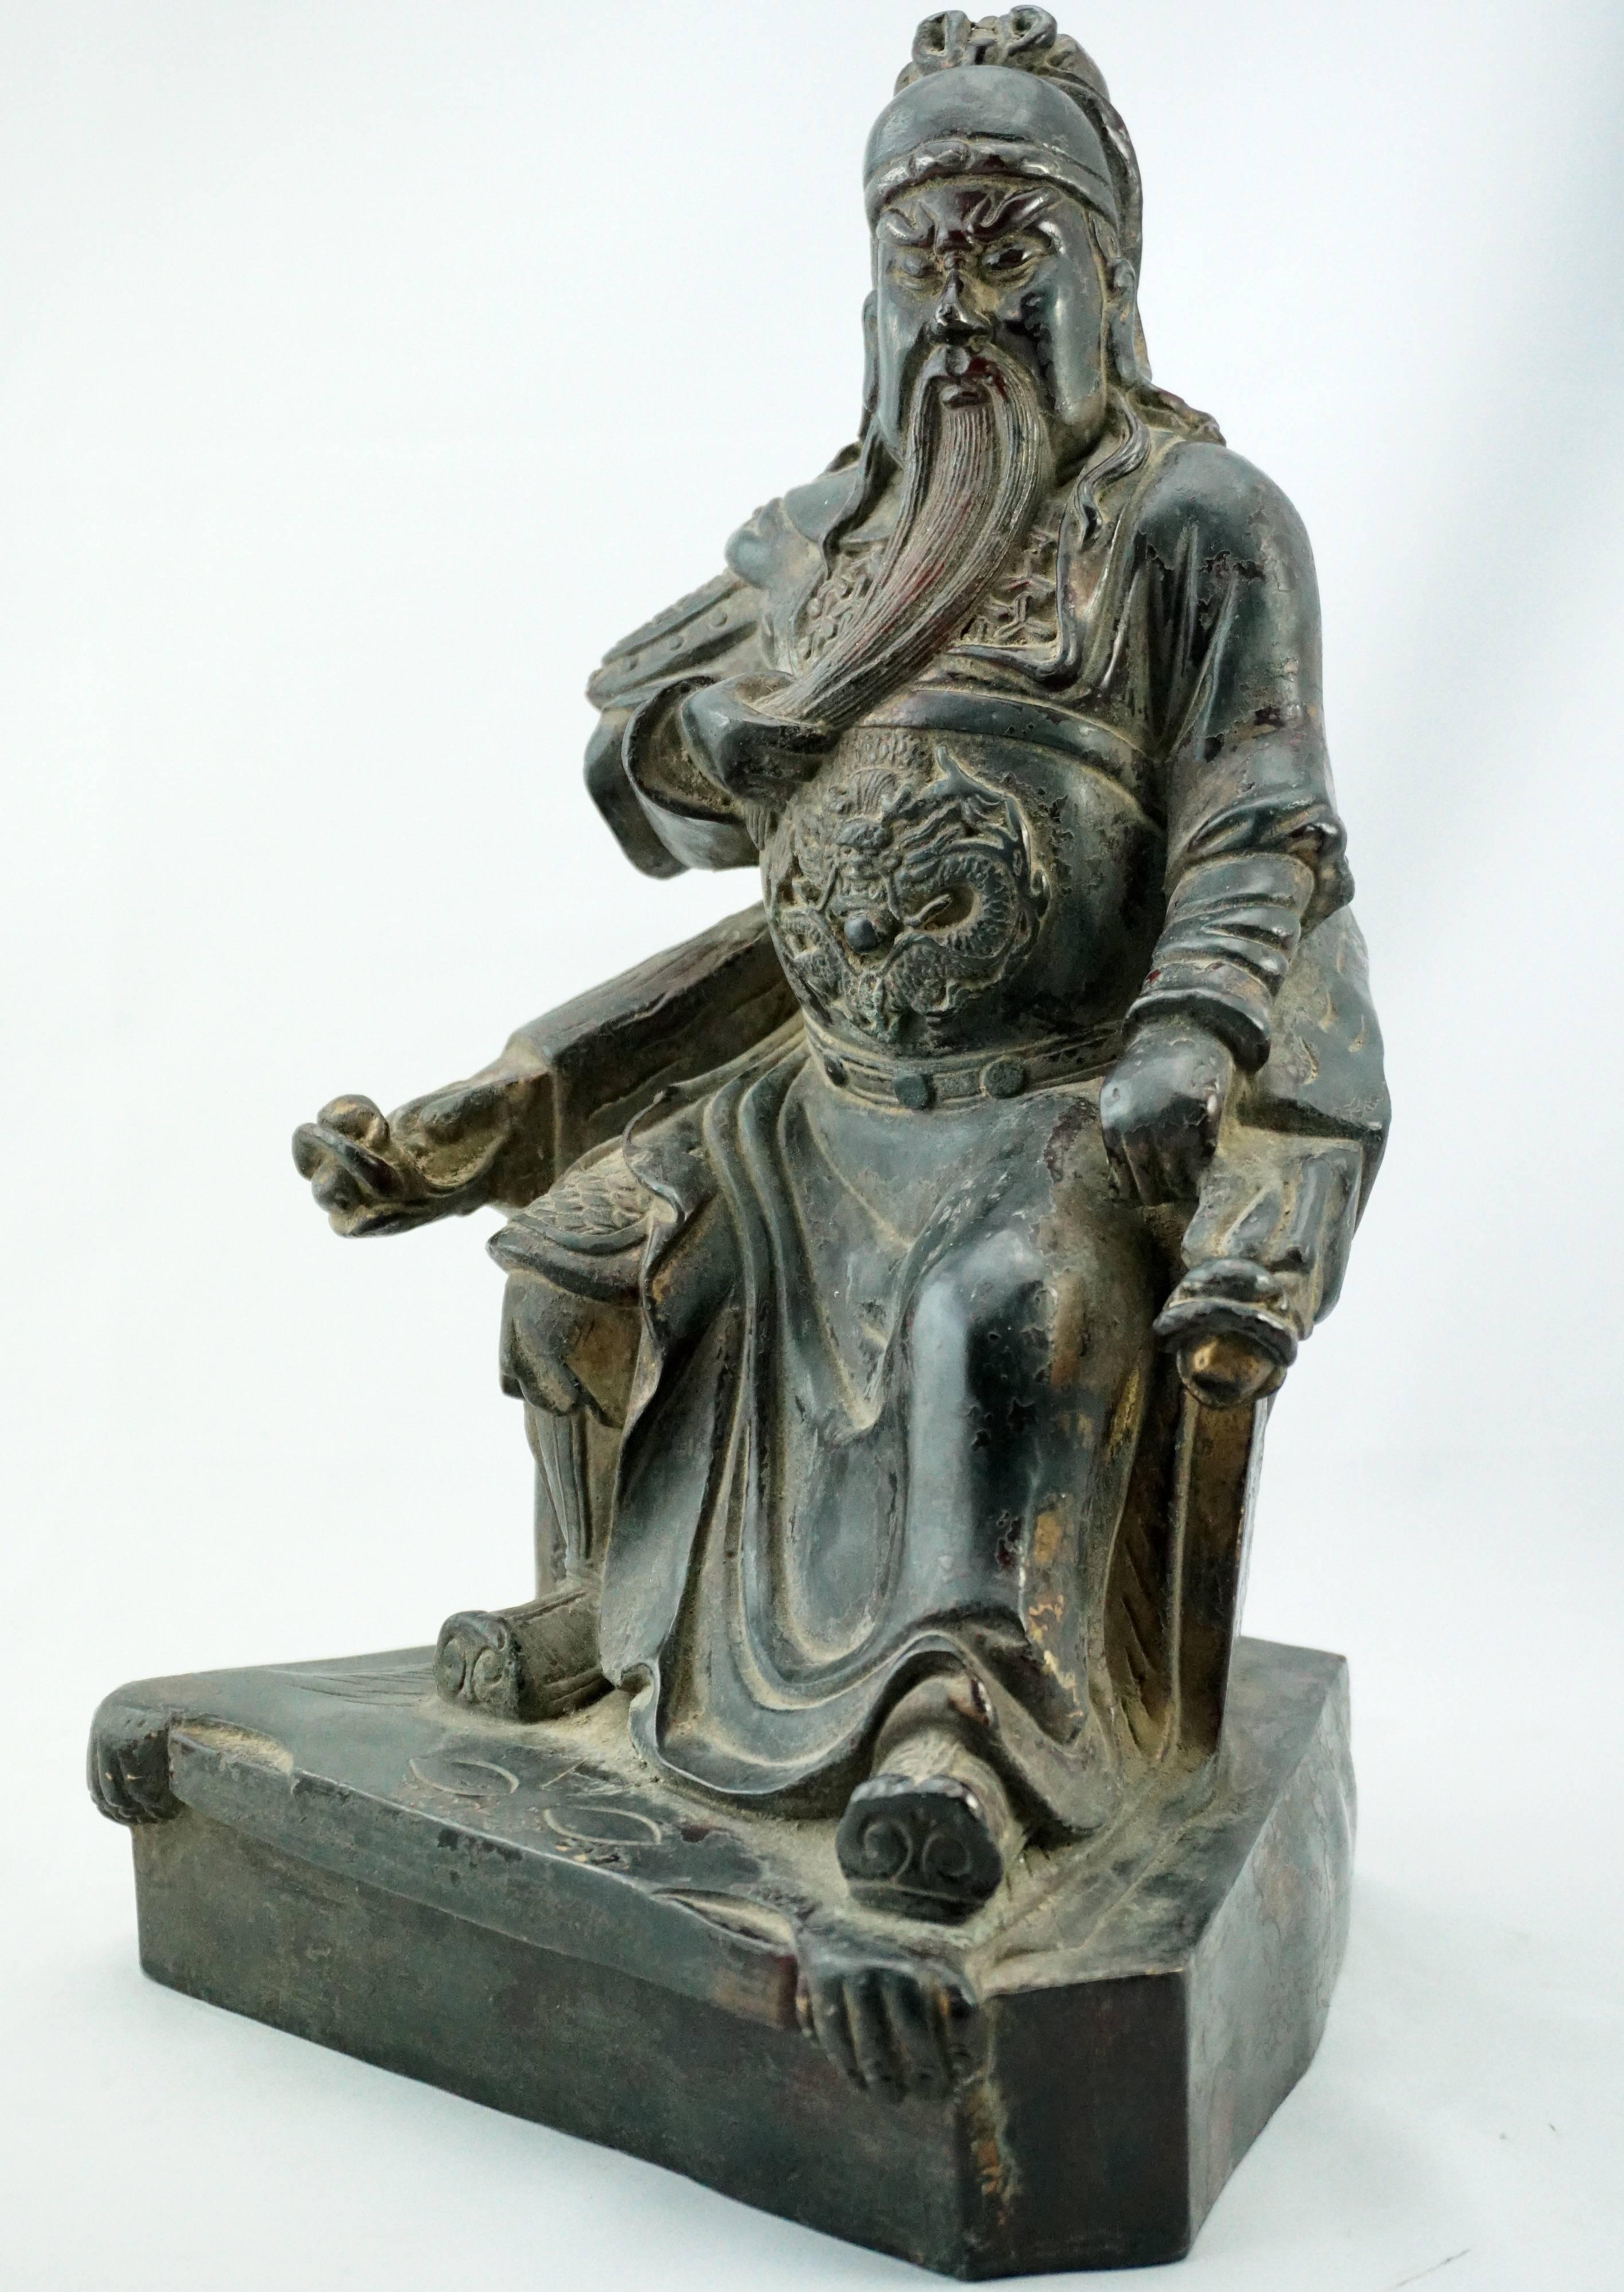 Qing 18th century bronze of a seated emperor (Possibly Guan Yu). Showing strength in ornate battle attire seated on a double armed dragon chair adorned with tiger skin backing and rug. Deatailed chasing. A very commanding piece that would adorn any